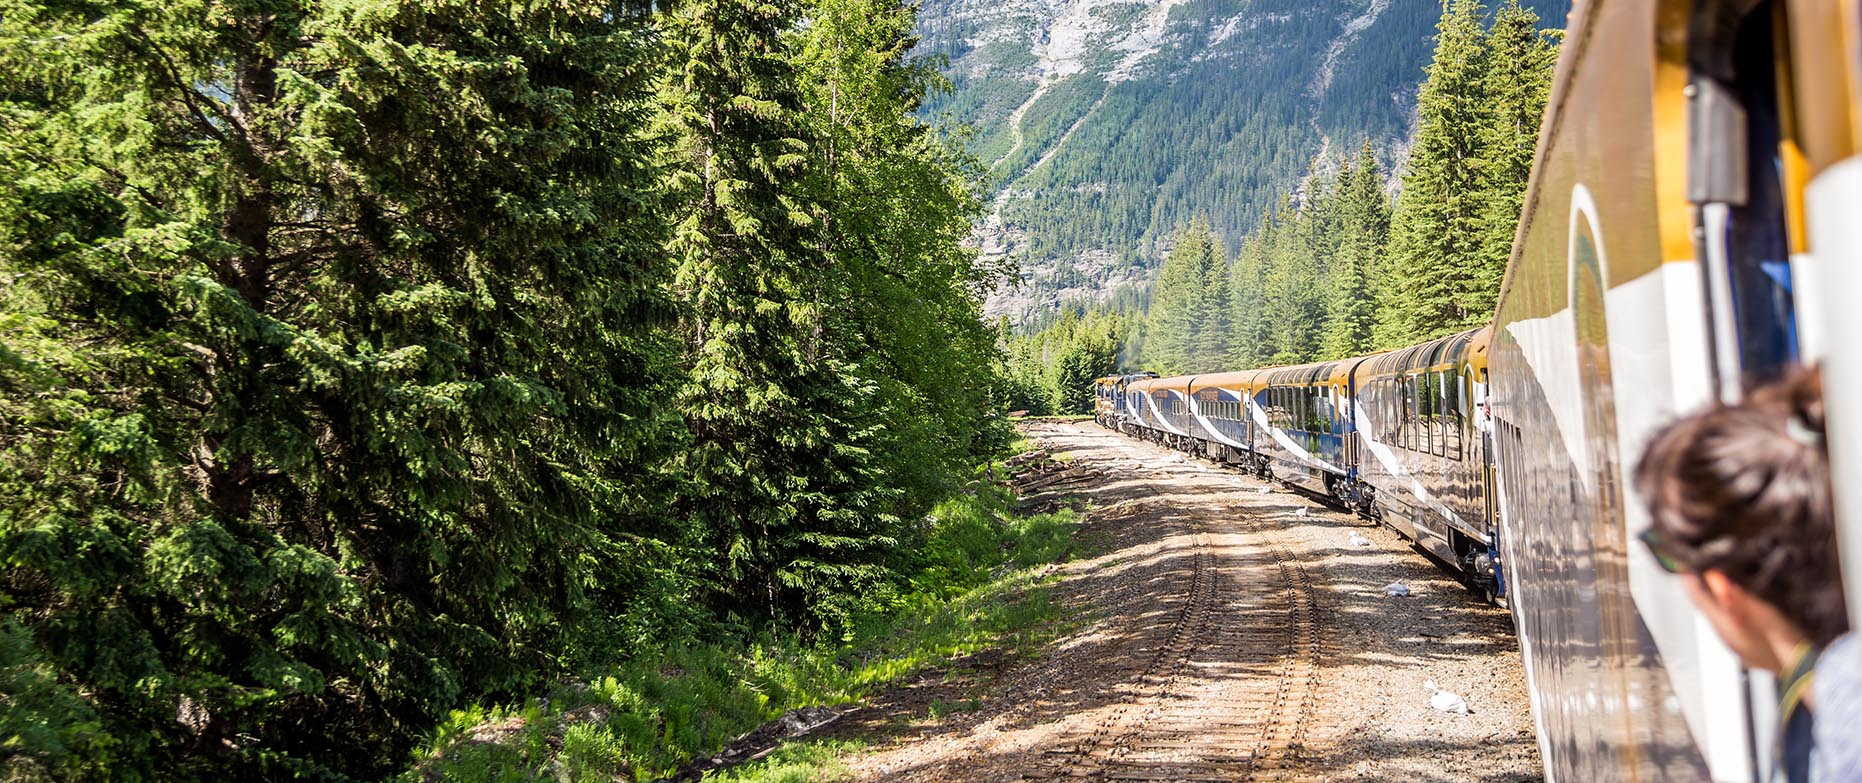 Cunard Partners with Rocky Mountaineer The Cruise Line